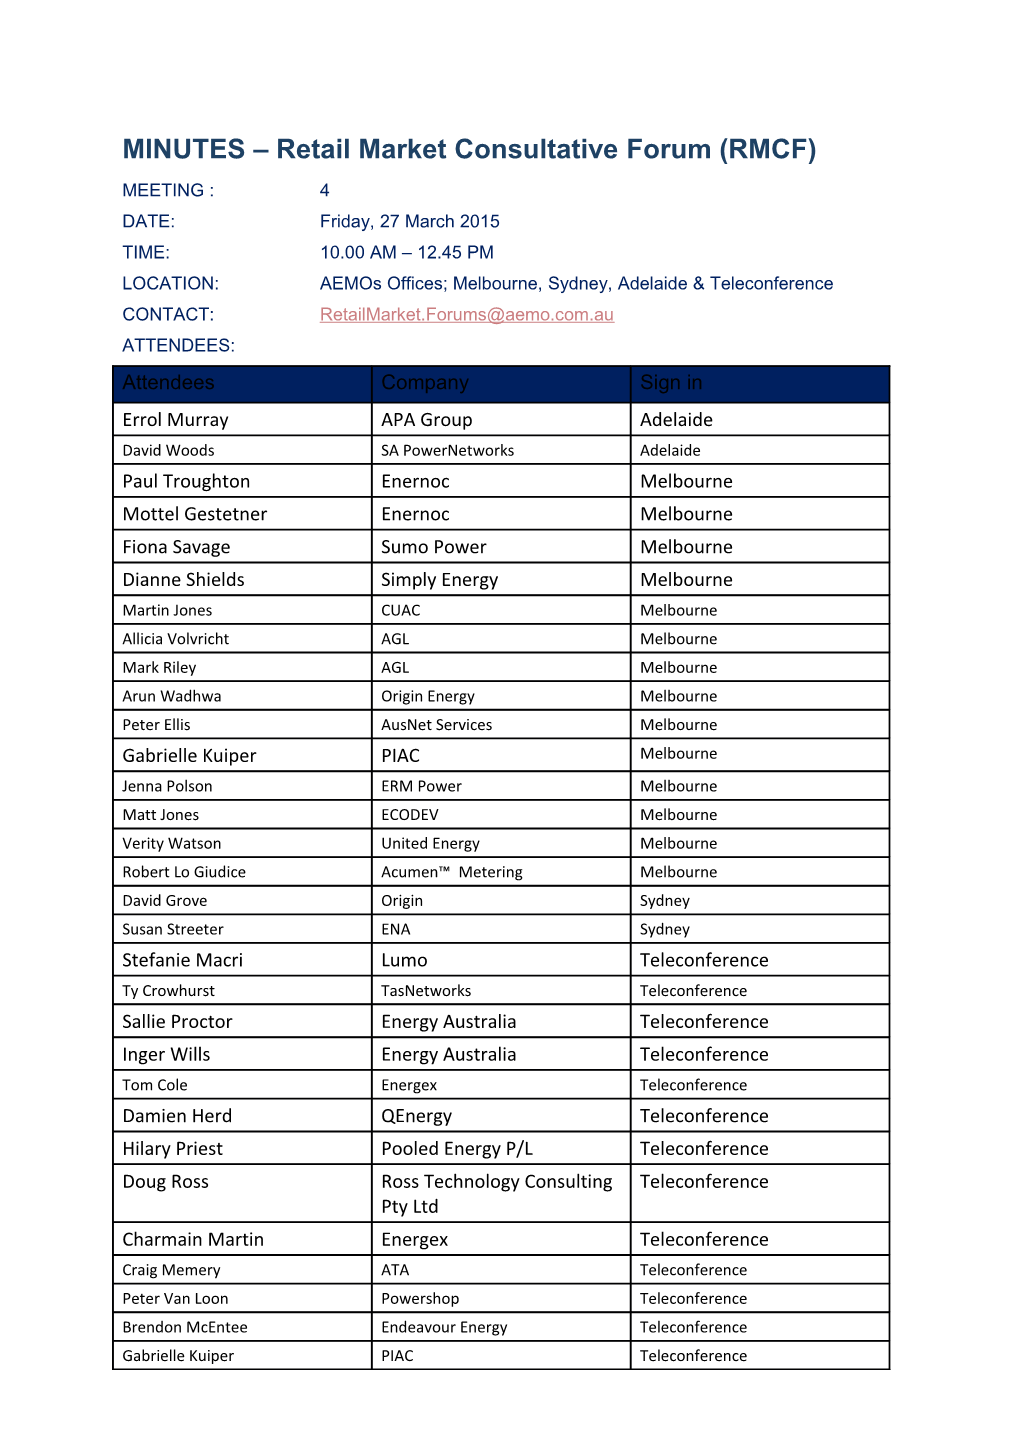 RMCF - 27 March 2015 - Draft Minutes (Final)